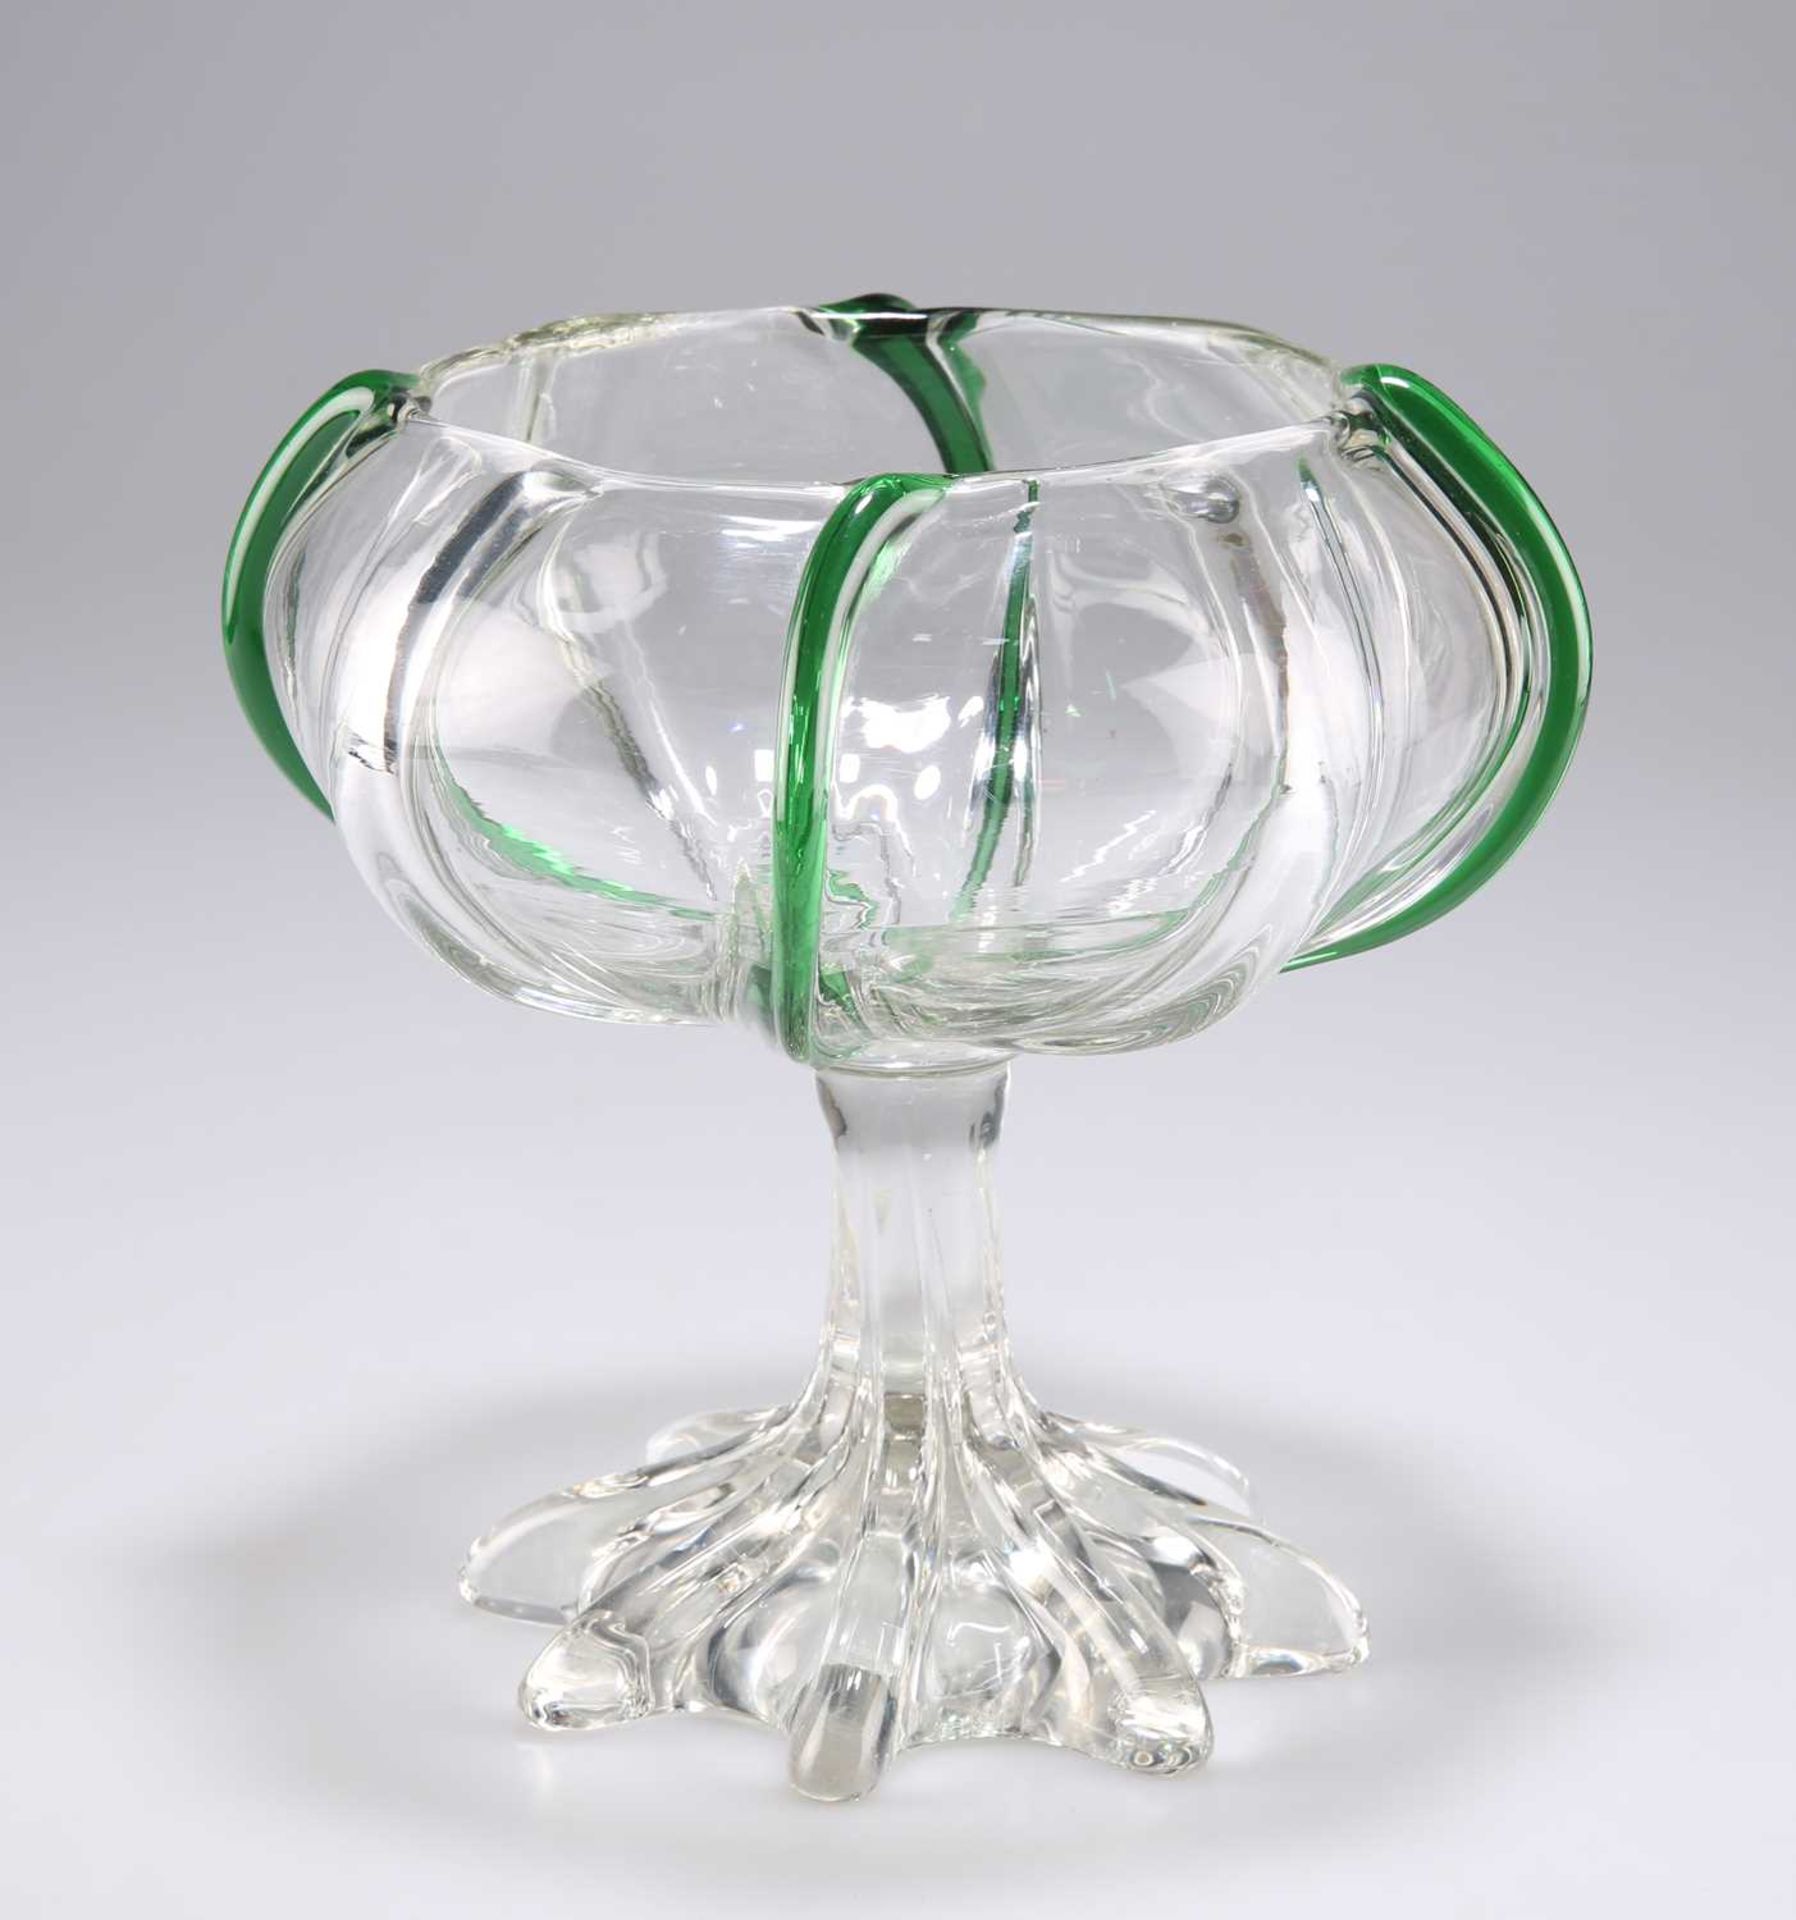 ATTRIBUTED TO JAMES POWELL, AN ART NOUVEAU GREEN-TRAILED GLASS BOWL